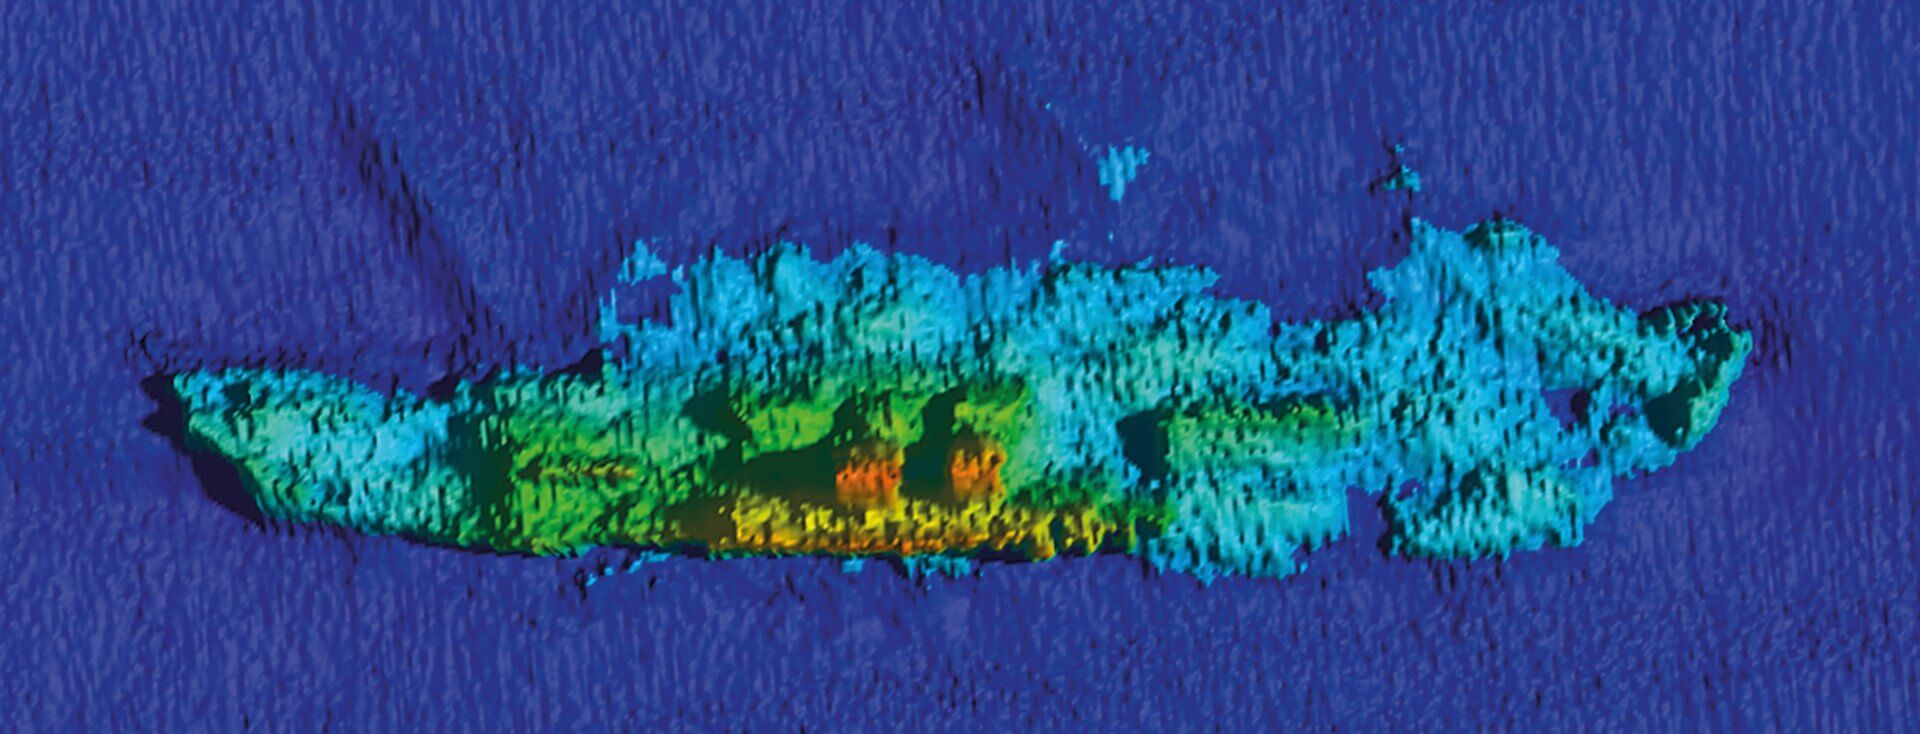 Sonar scan of the wreck of the SS Mendi lying off the Isle of Wight